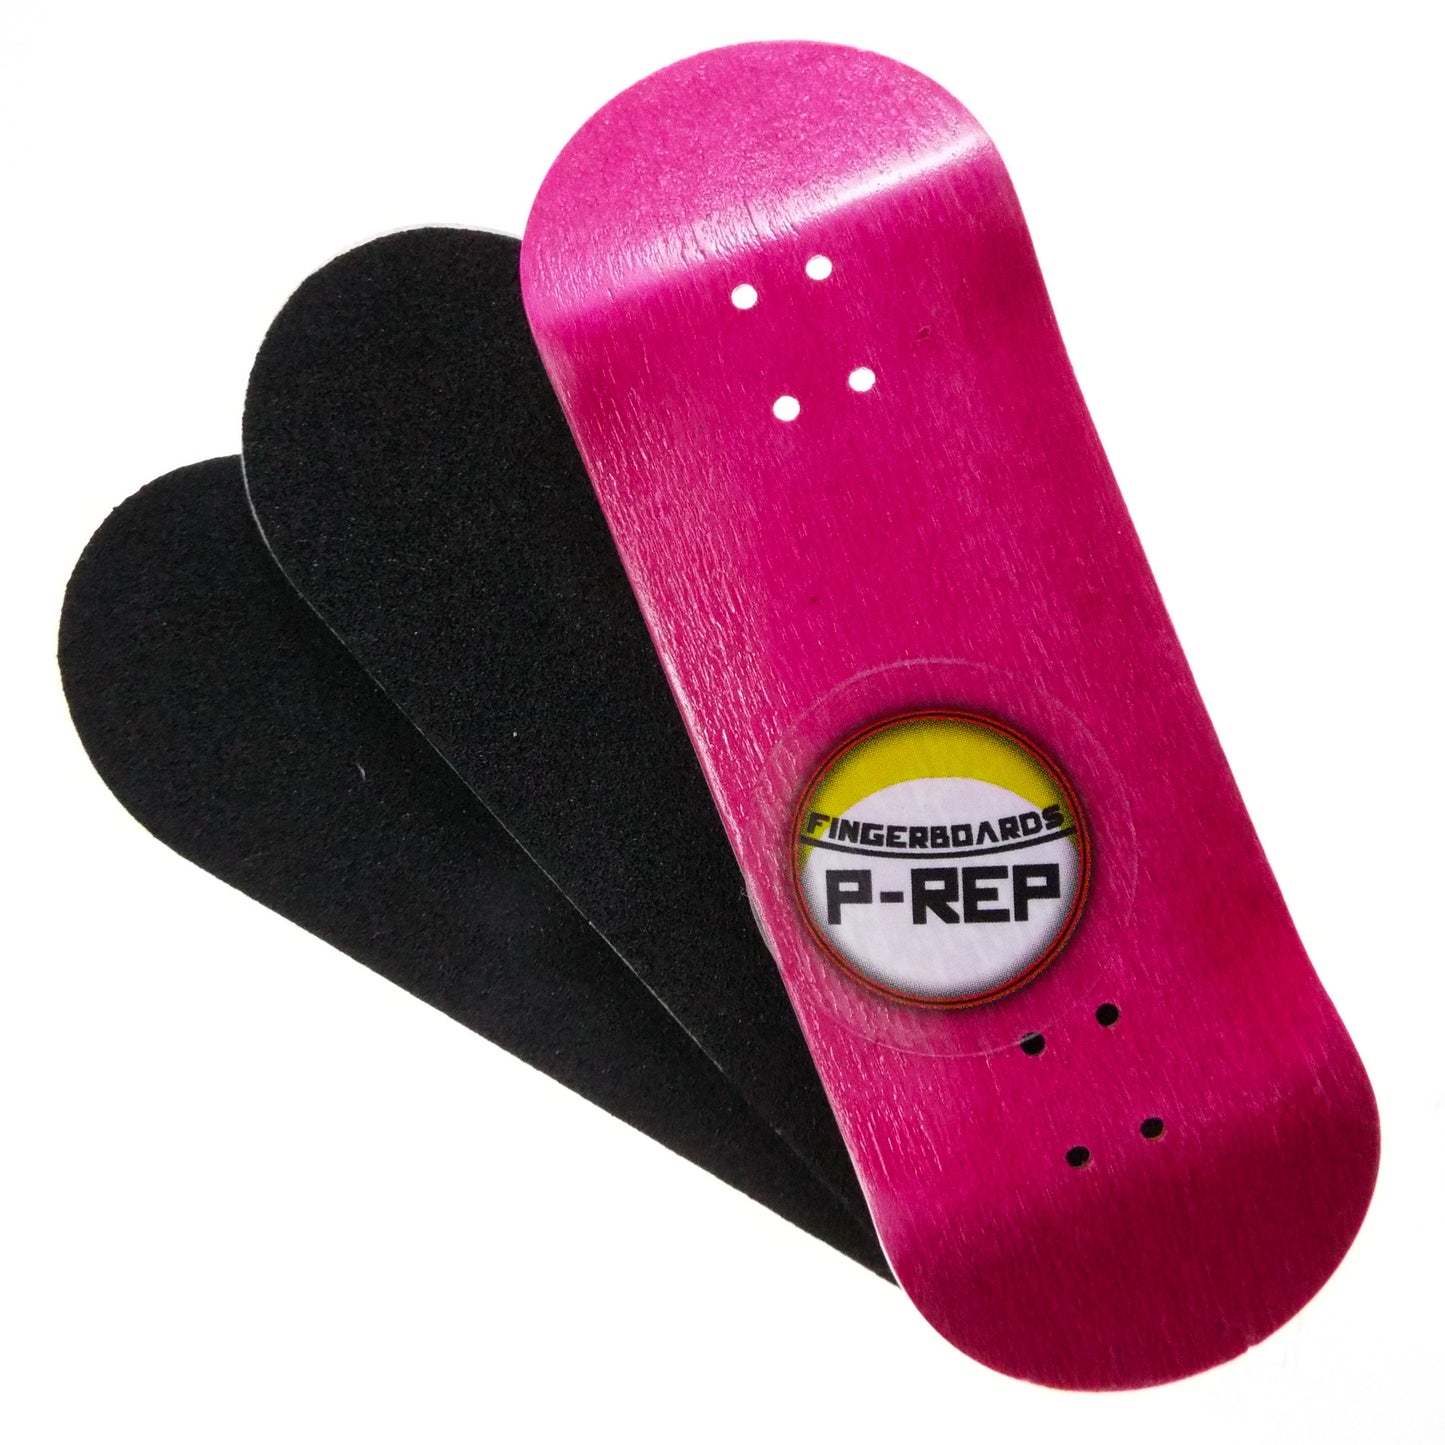 P-REP  32mm x 97mm V2 Standard Complete - Pink